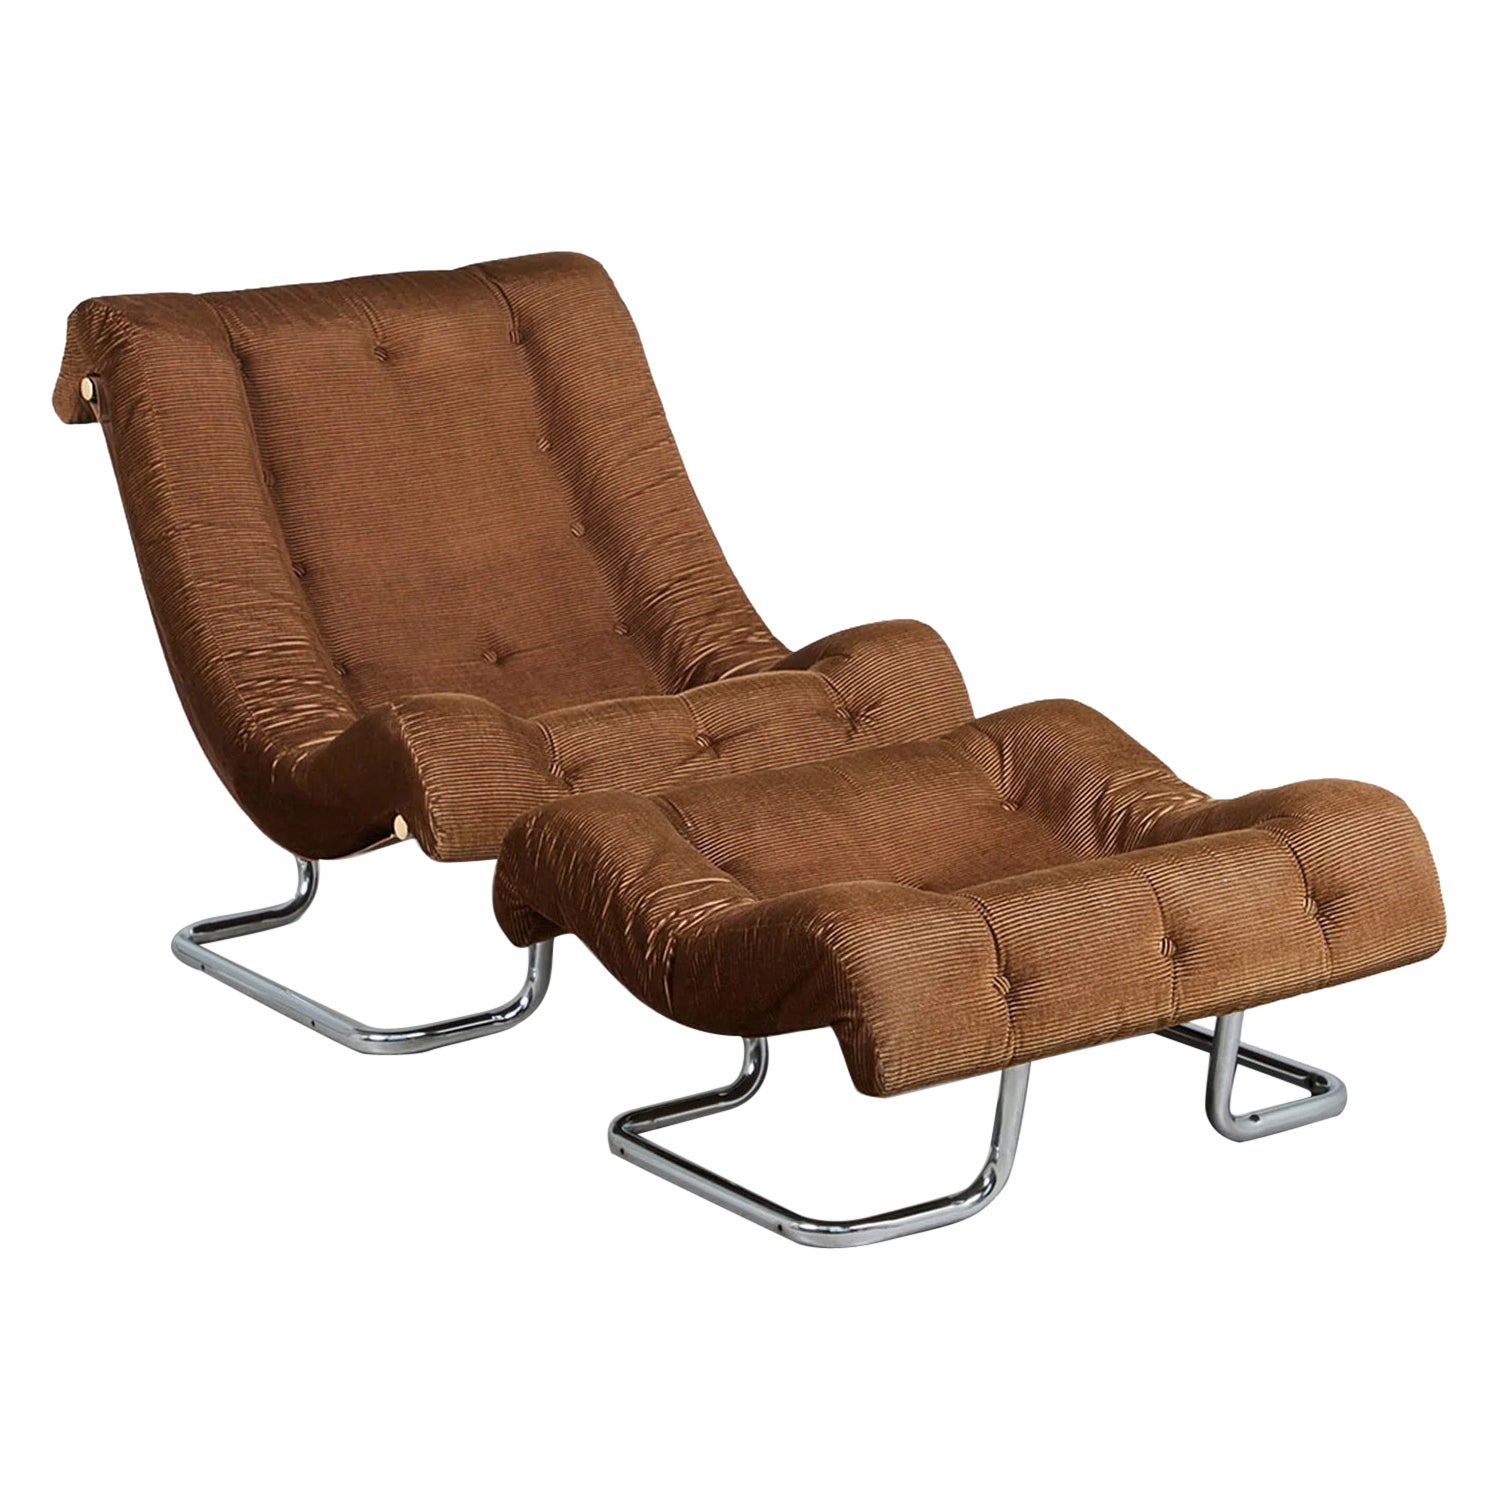 "Formula" lounge chair and ottoman by ruud ekstrand & christer norman